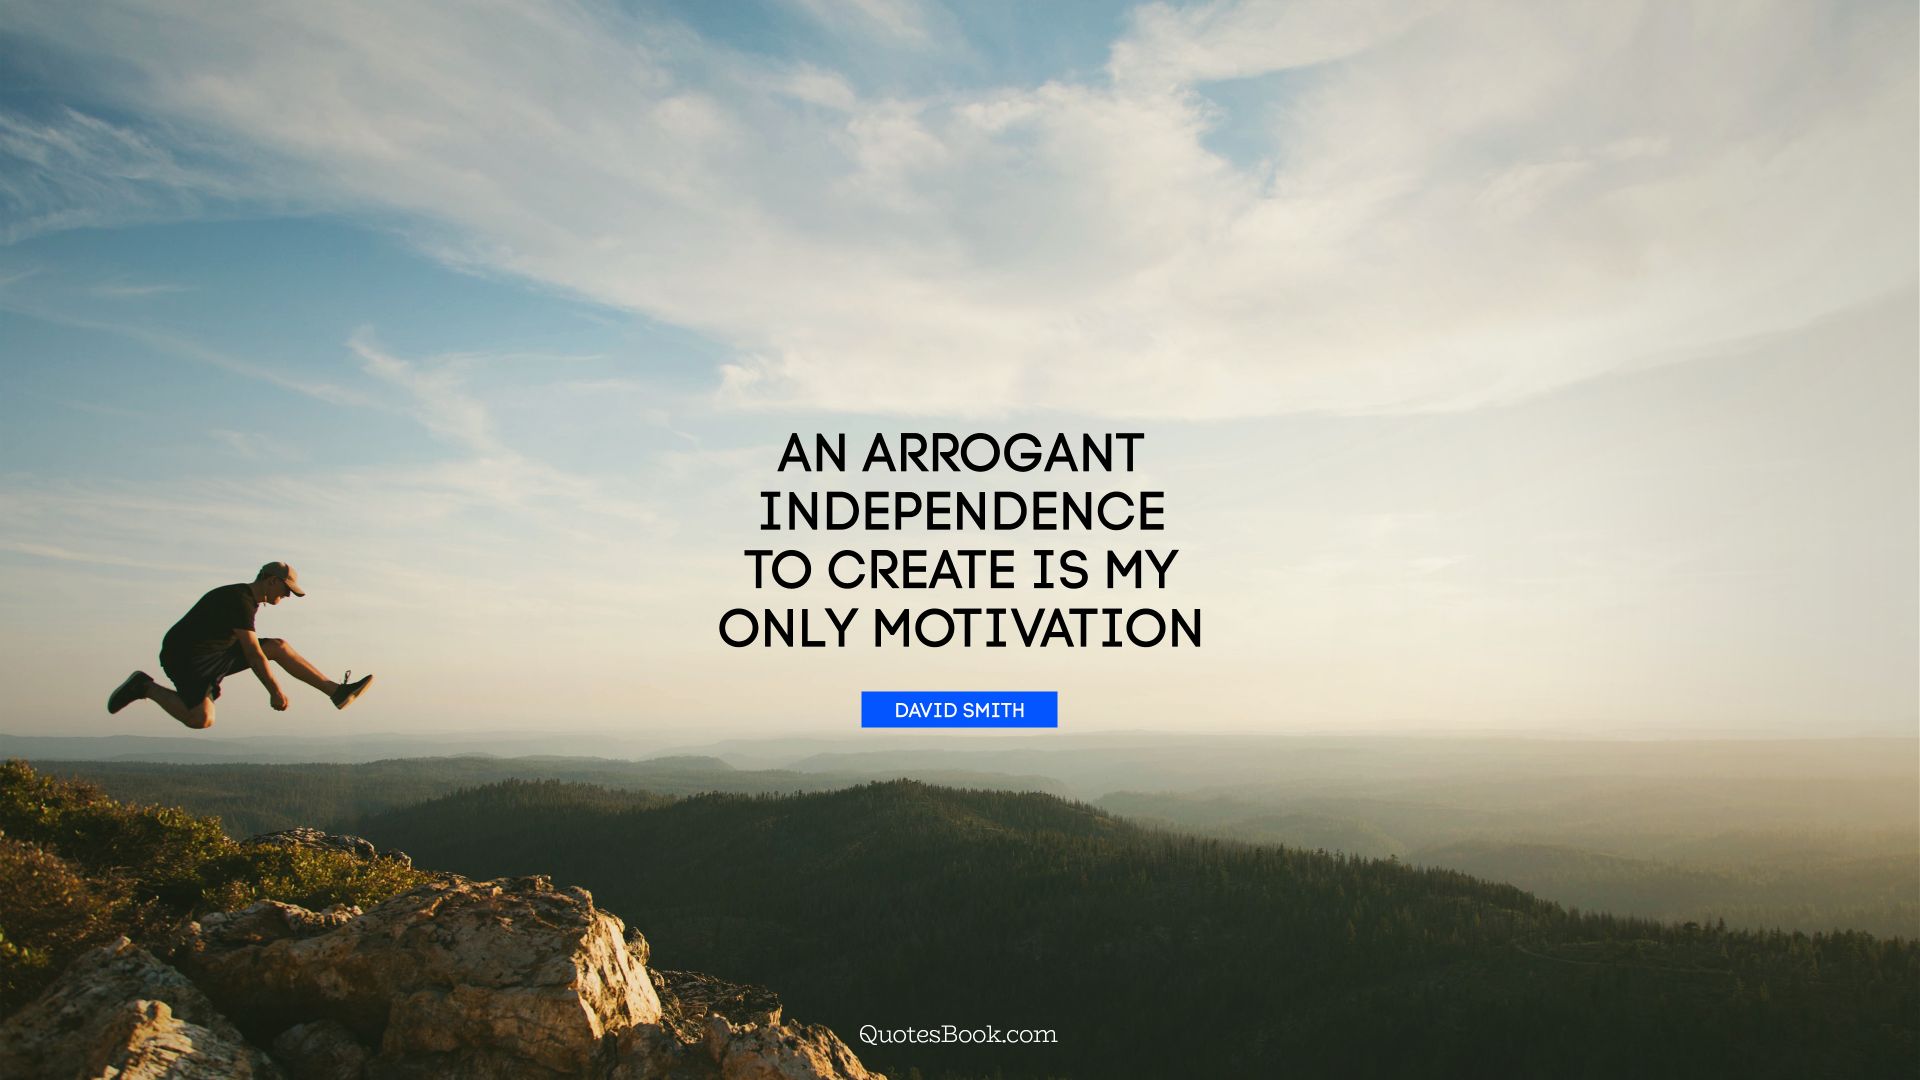 An arrogant independence to create is my only motivation. - Quote by David Smith